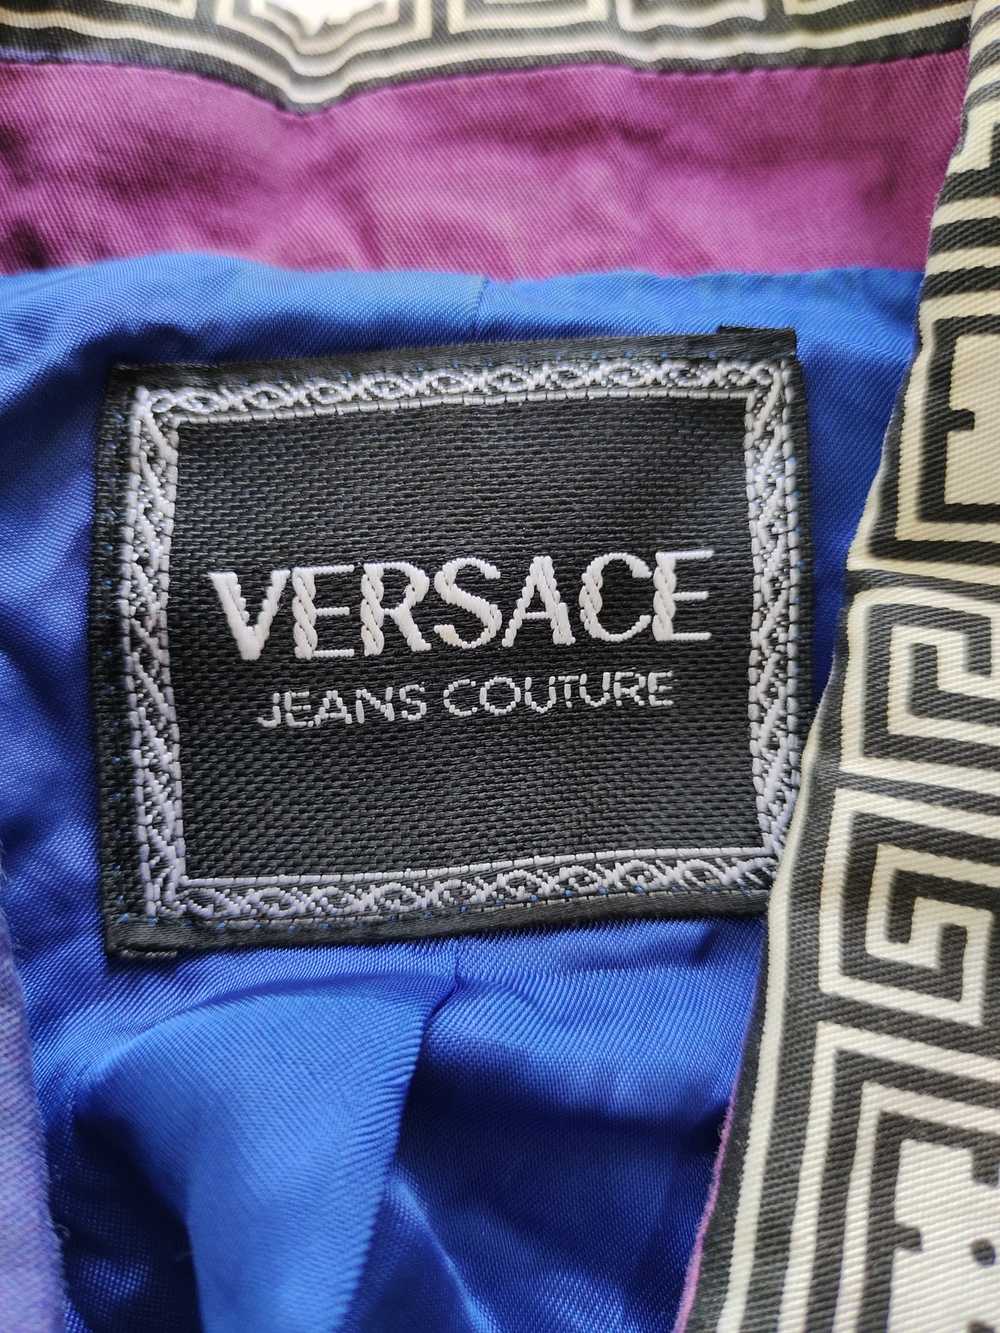 Versace Jeans Couture Luxurious Versace set - image 5